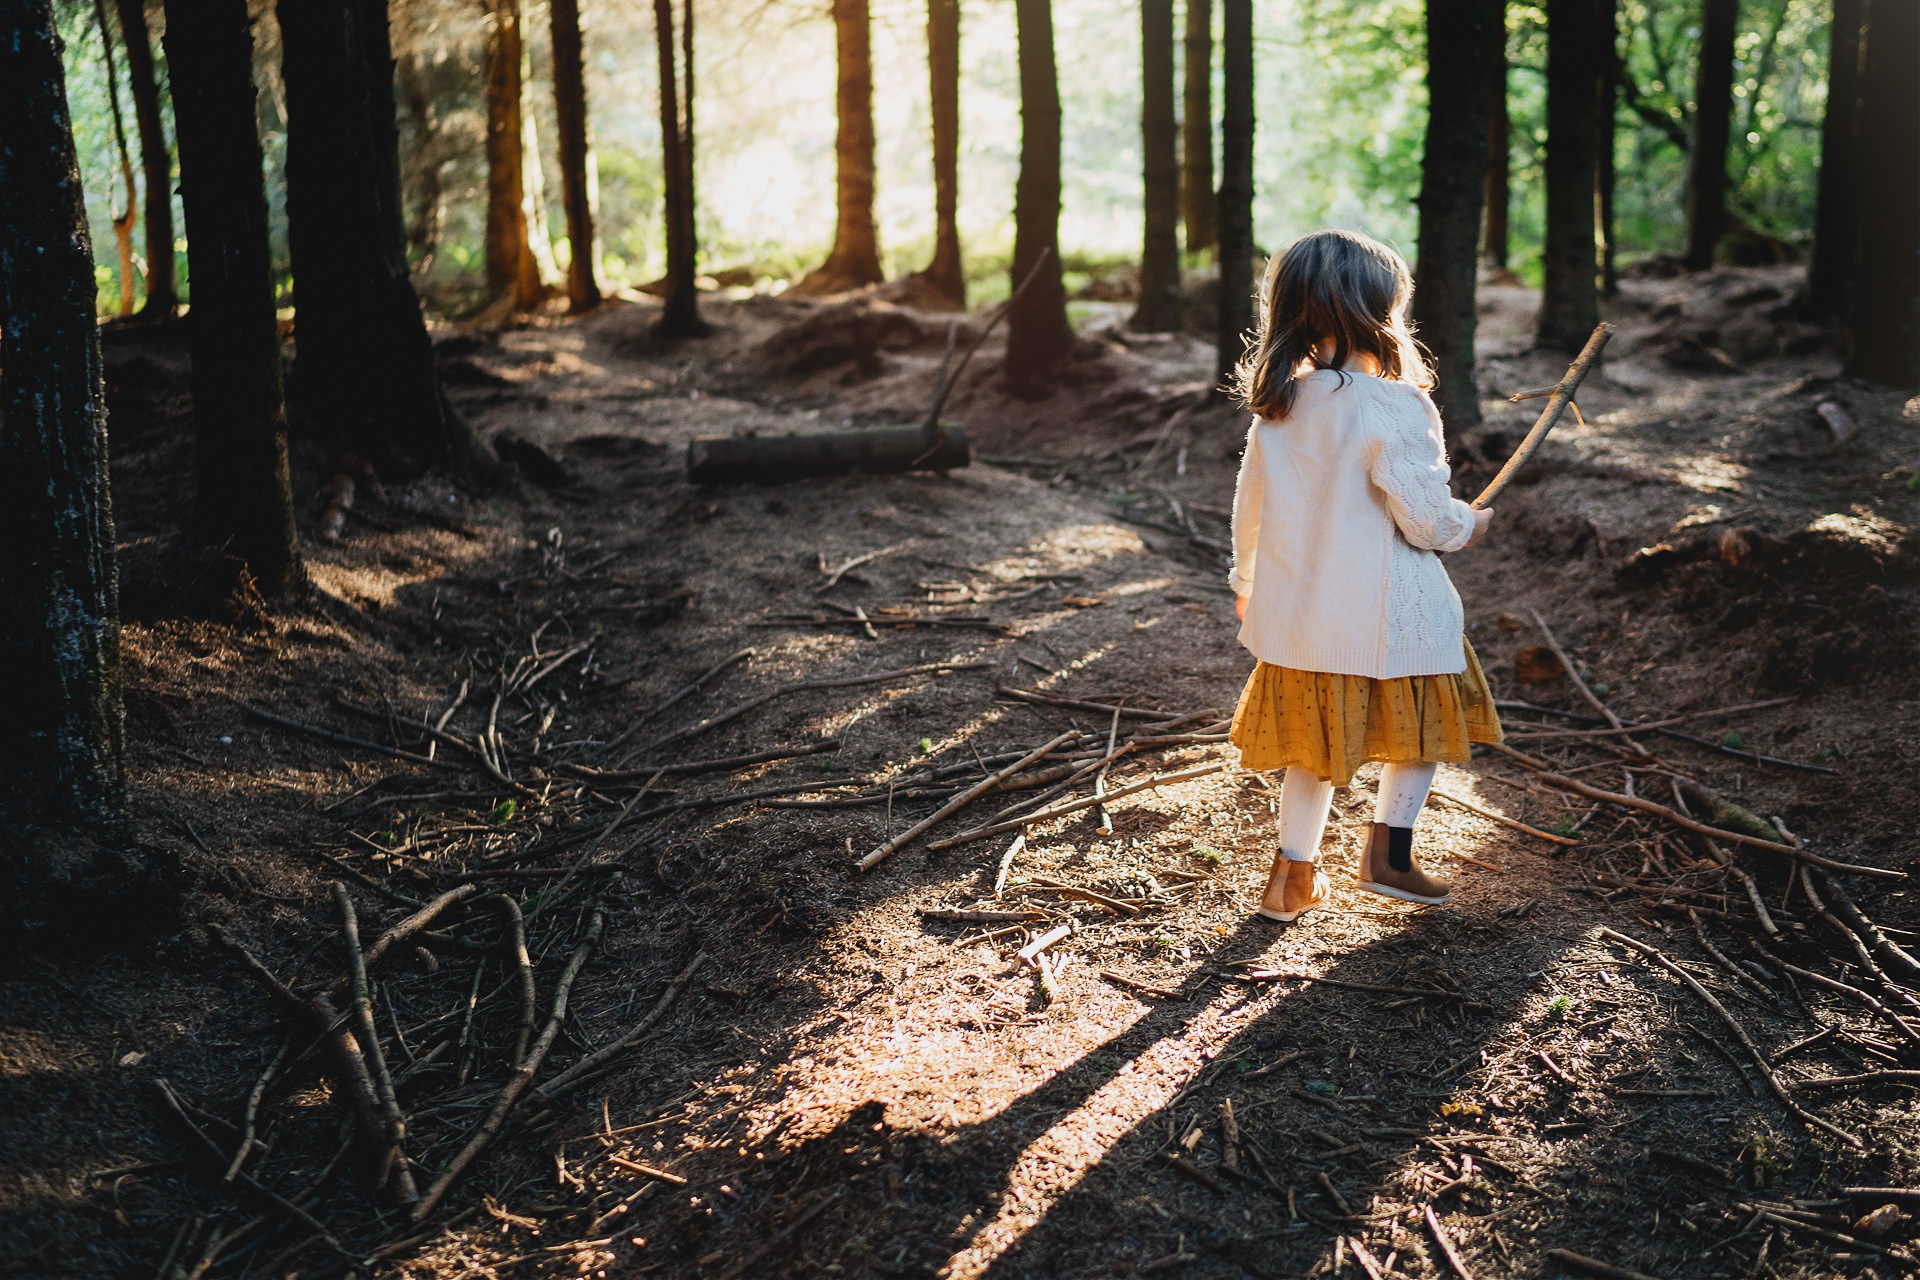 A young girl exploring woods with a stick in her hand